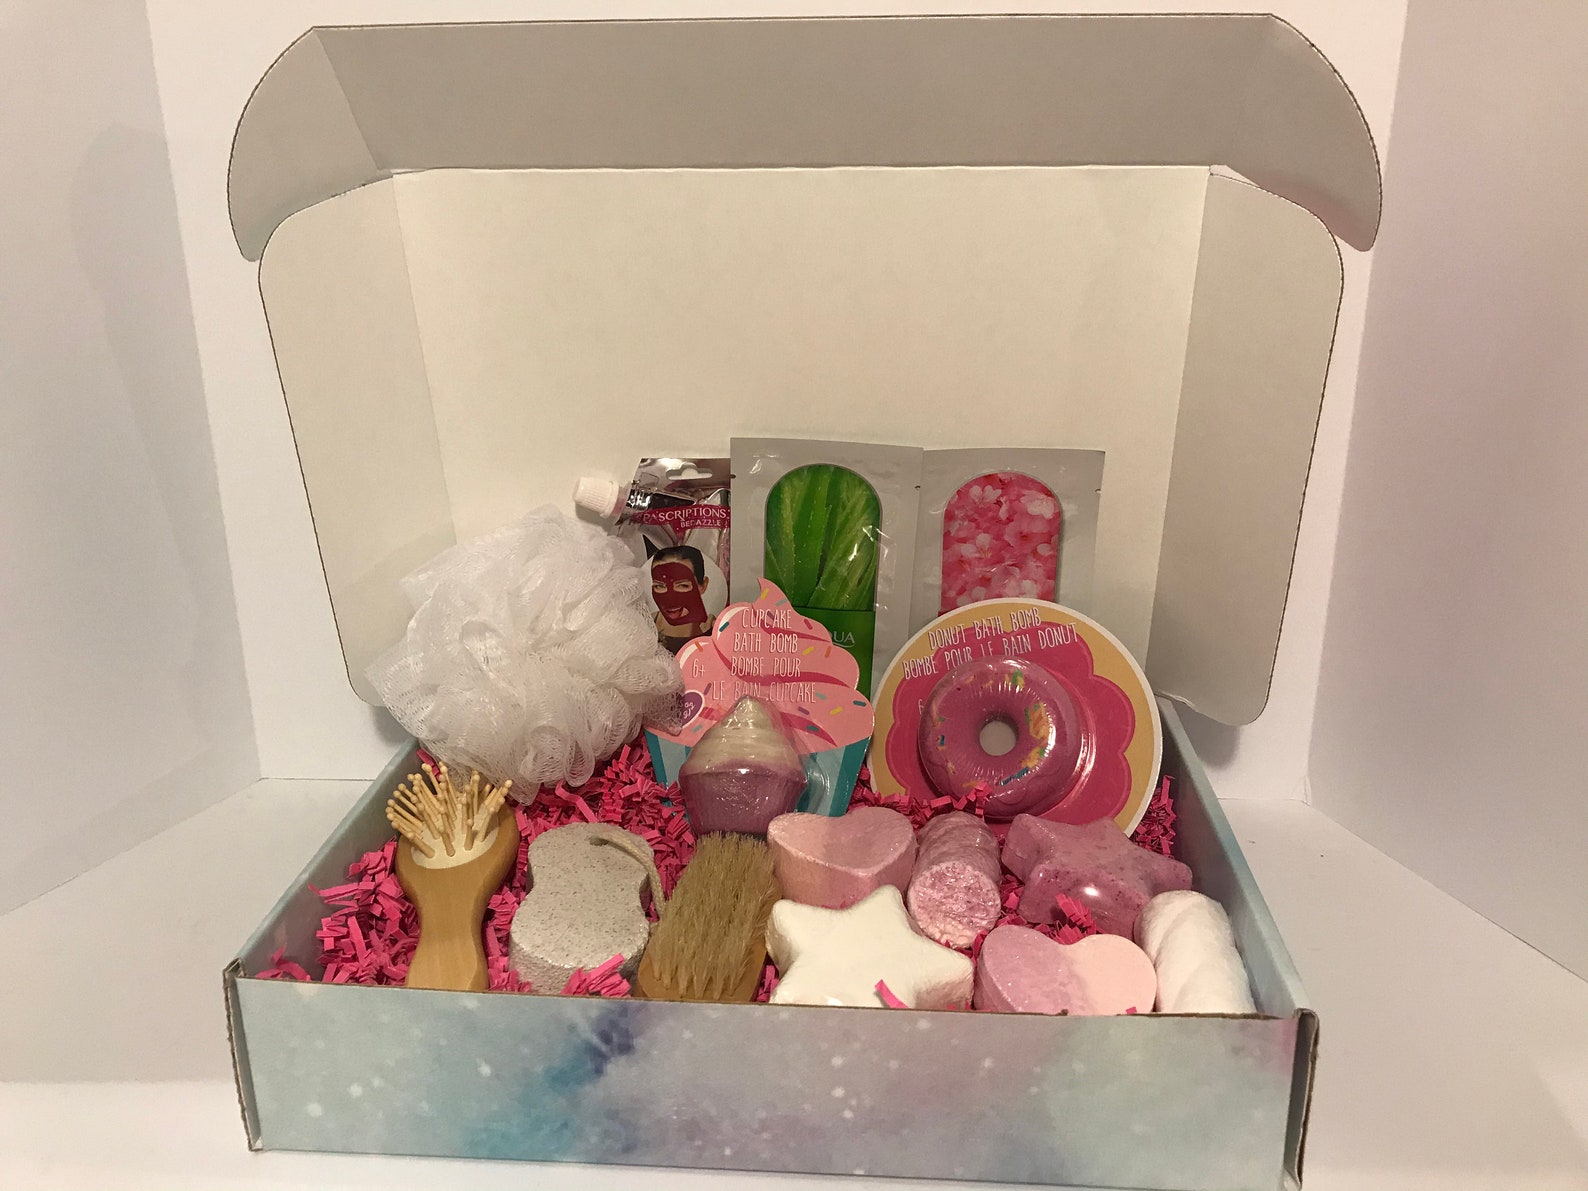 Luxury Bath Bomb Gift Set with Juicy Couture Bath Fizzers